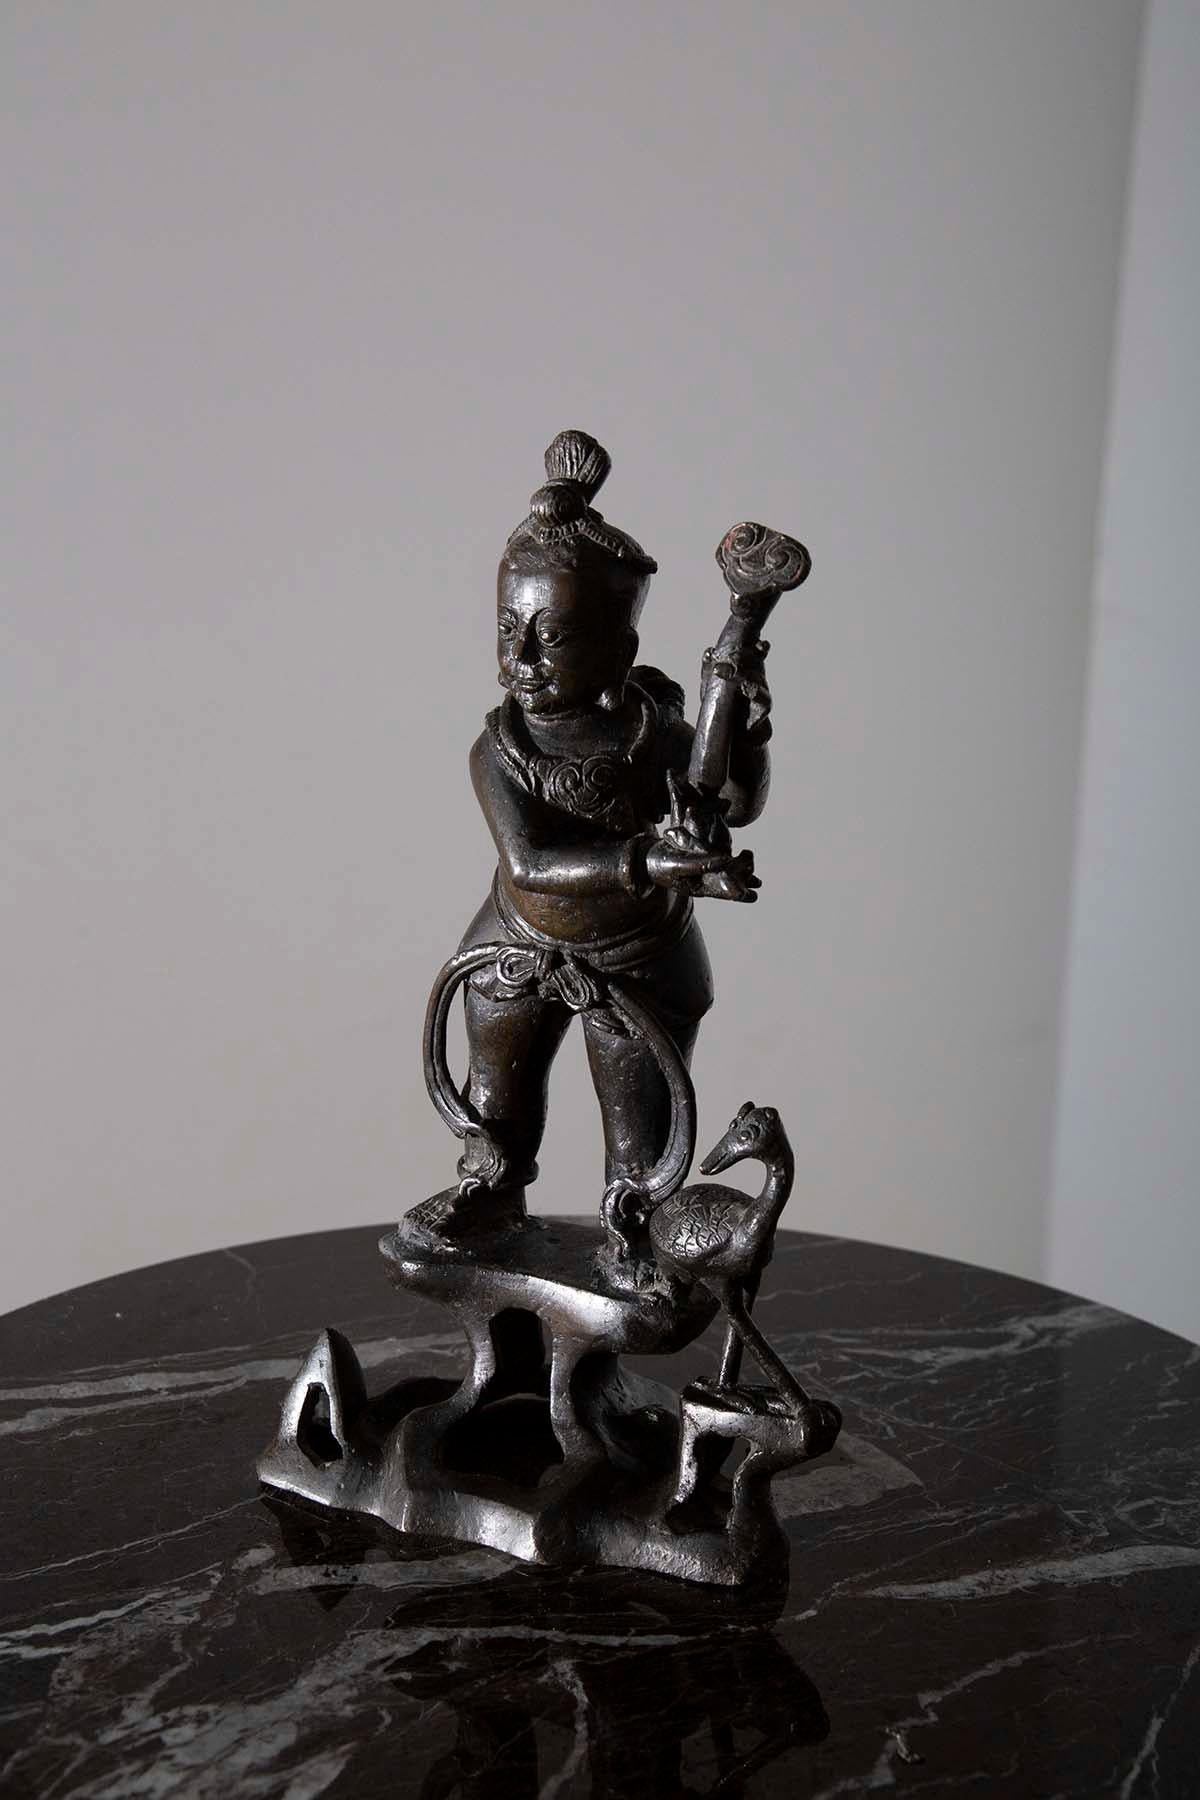 In the heart of ancient China, within the resplendent Ming dynasty, a masterpiece was cast in bronze, a testament to a culture steeped in mysticism and spirituality. This Taoist bronze figure, a relic from the 16th century, transcends mere